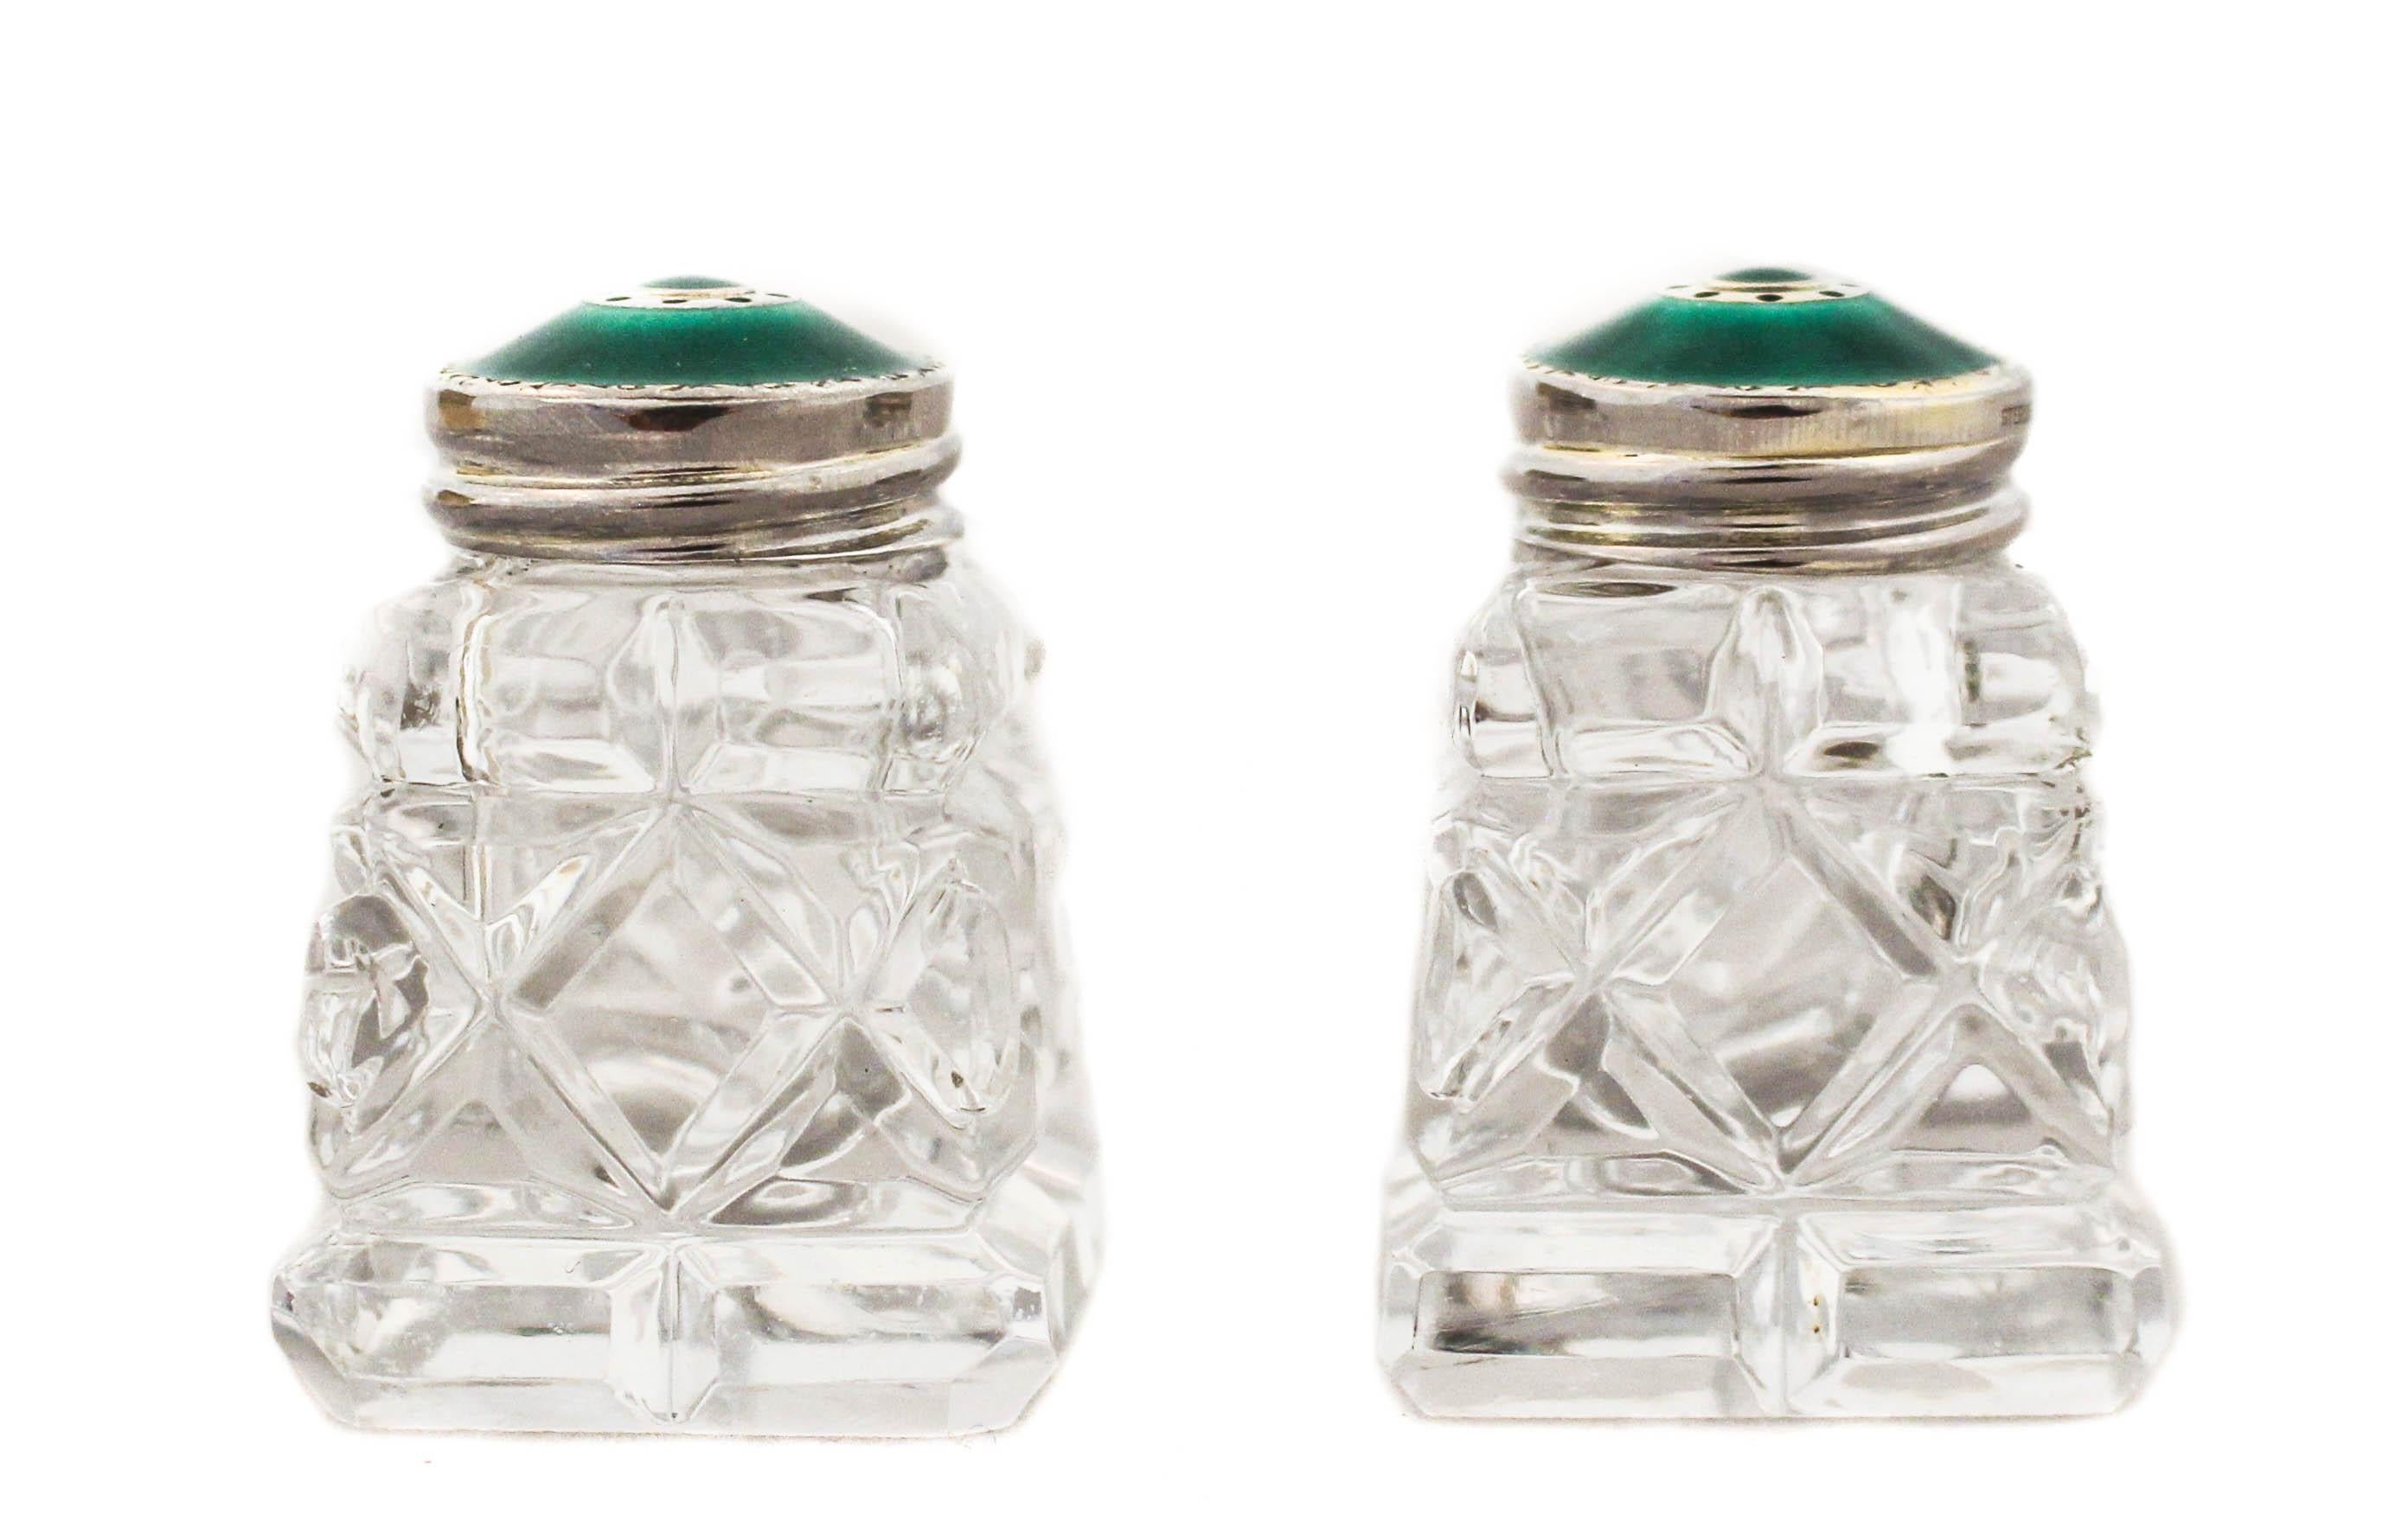 These beautiful sterling silver and avocado green enamel salt shakers come in their original box.  Made in Norway in the post war 1940’s, they are in mint.  The rich green covers really pop out and give color to your table.  The salt never needs to